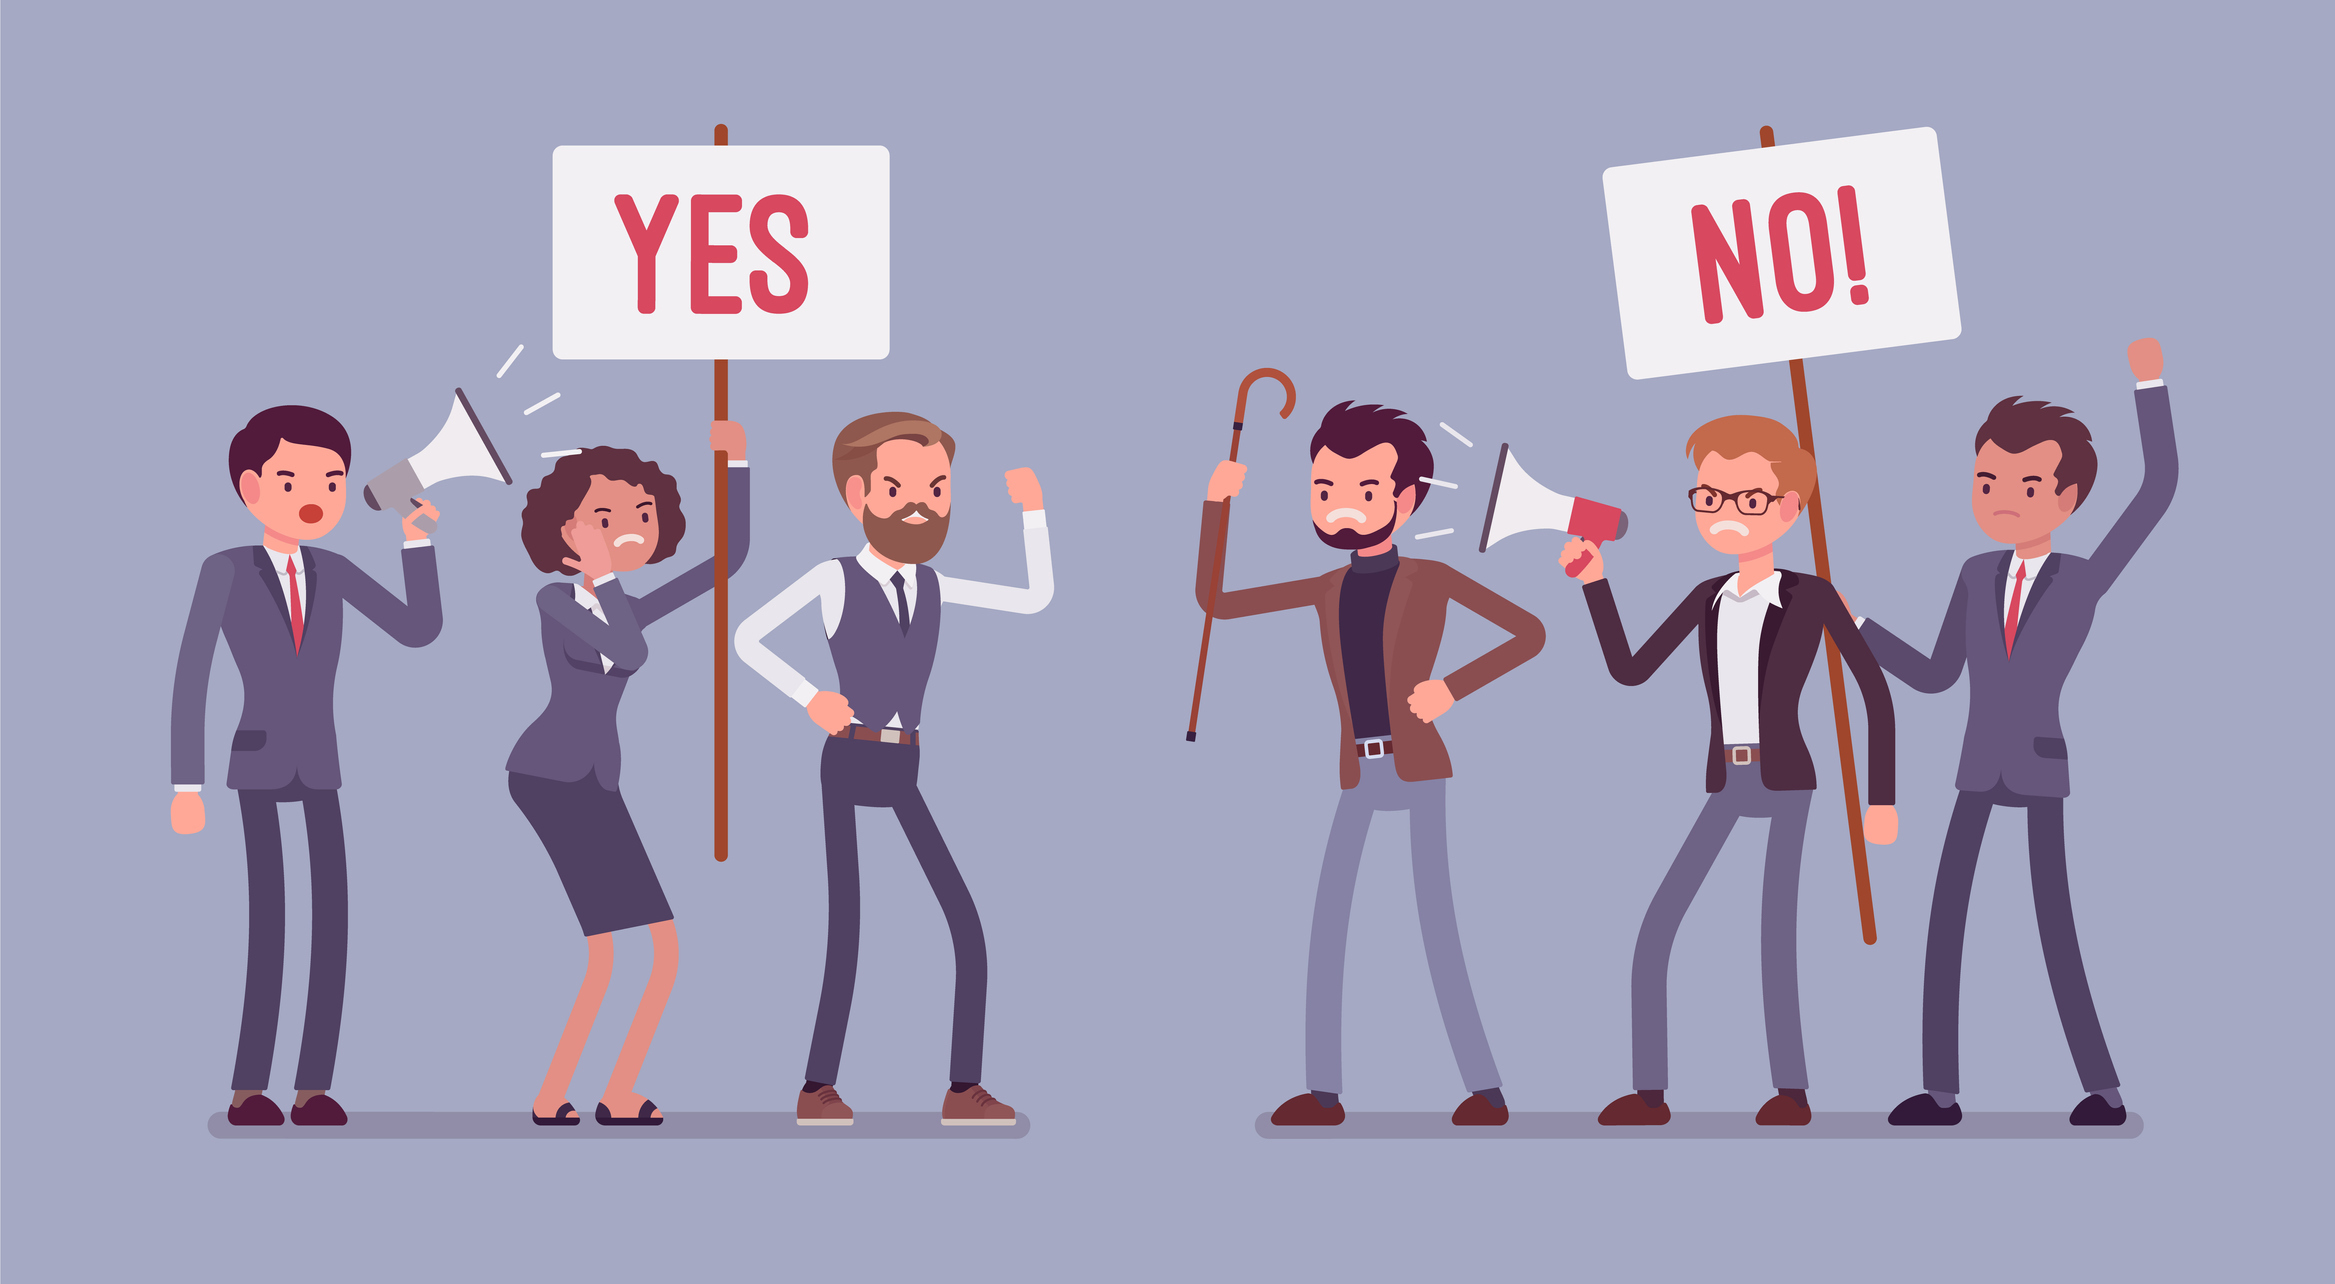 A cartoon drawing of six people. Two are holding megaphones, one is holding a sign that says "Yes," one is holding a sign that says "No," and one is holding a cane.